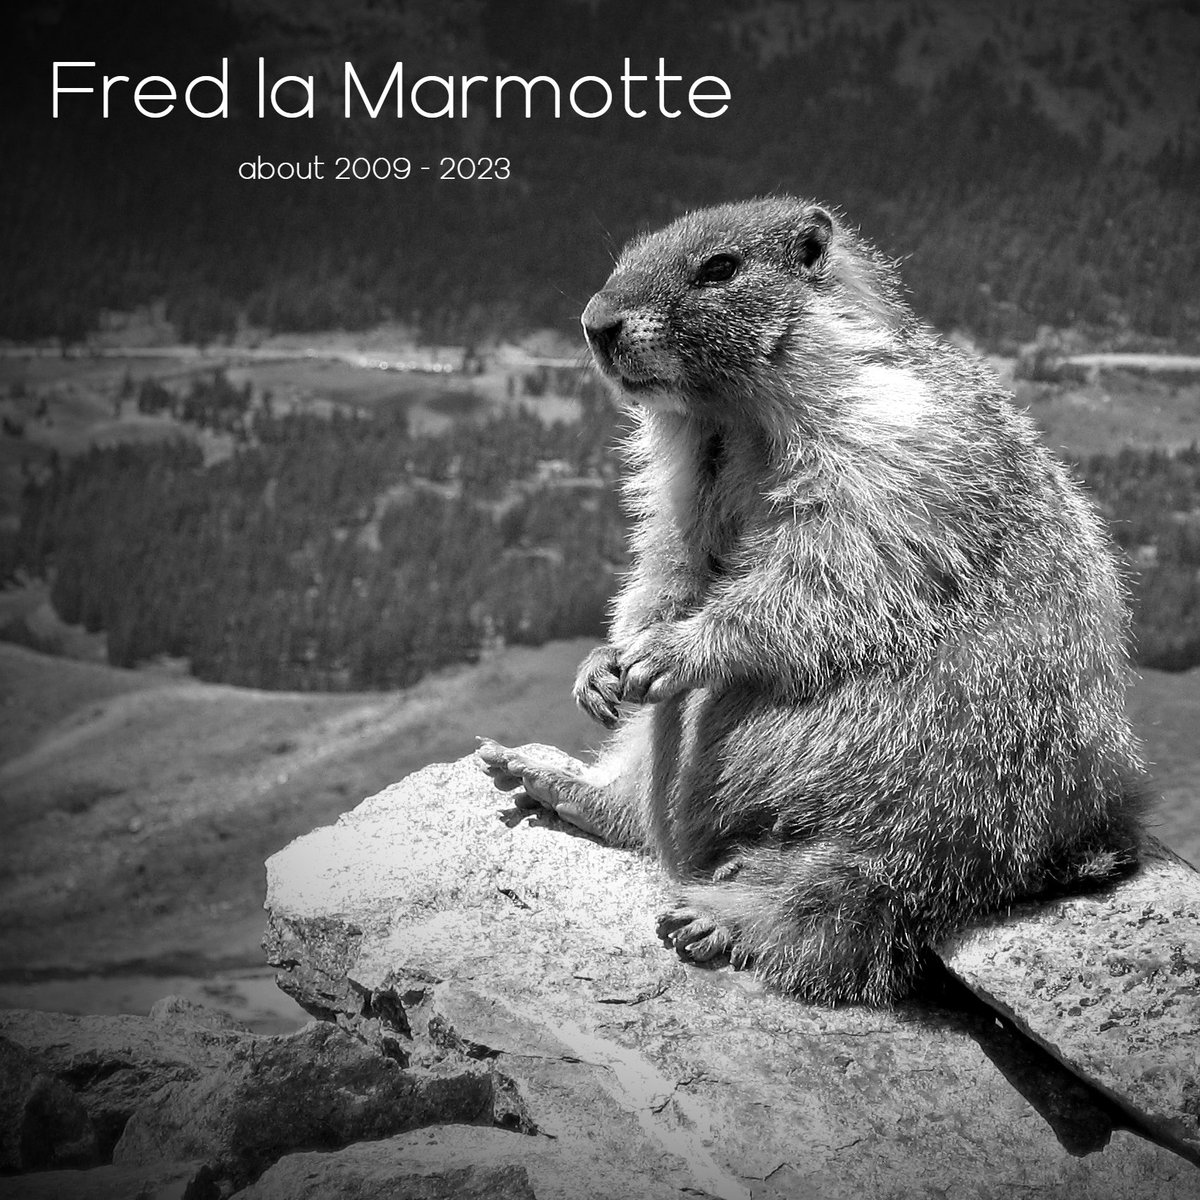 Quebec's groundhog died late last night. RIP Fred. #GroundhogDay2023